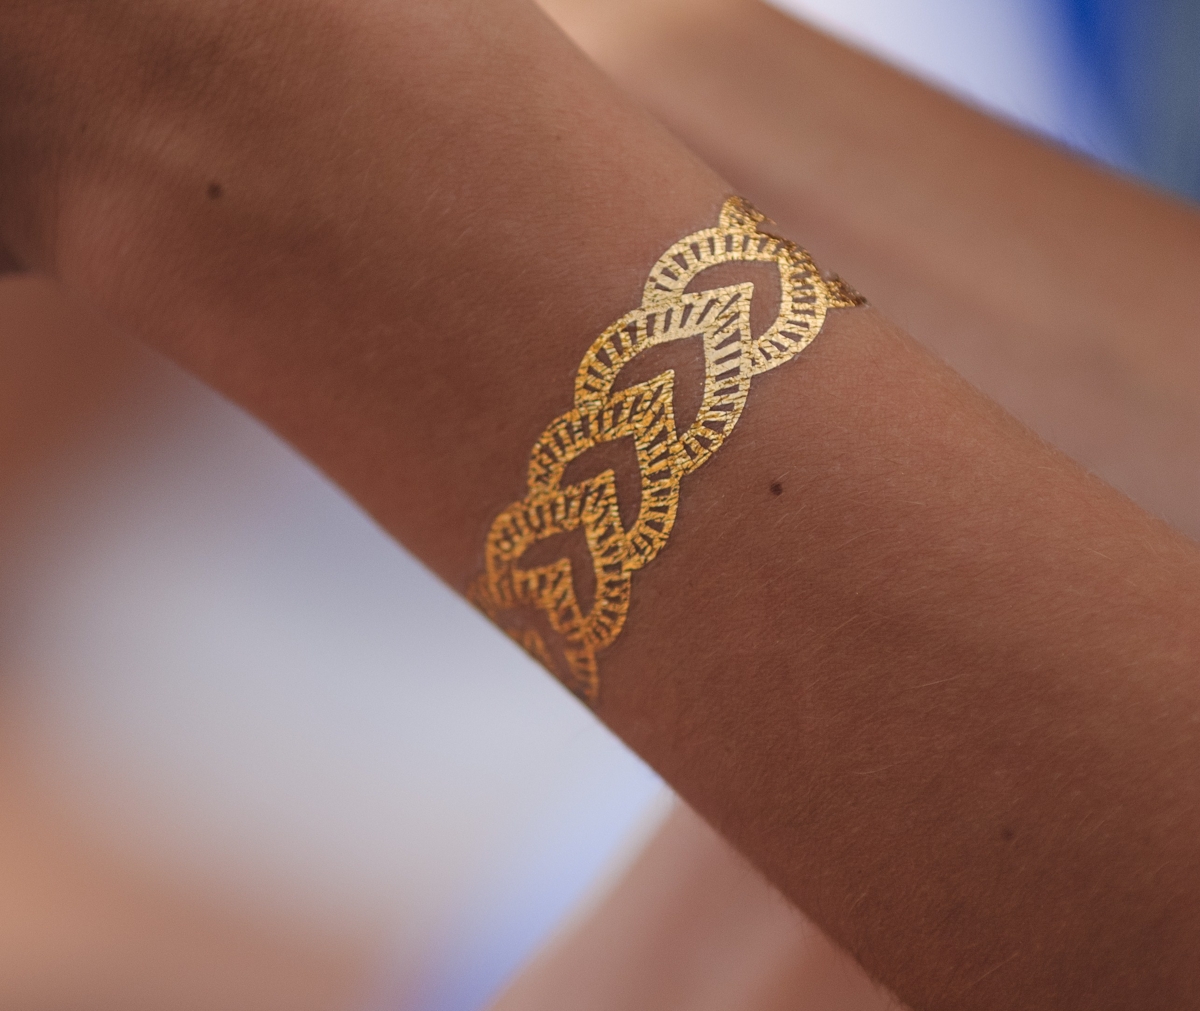 Temporary Tattoos that Last a Long Time - Thoughtful Tattoos